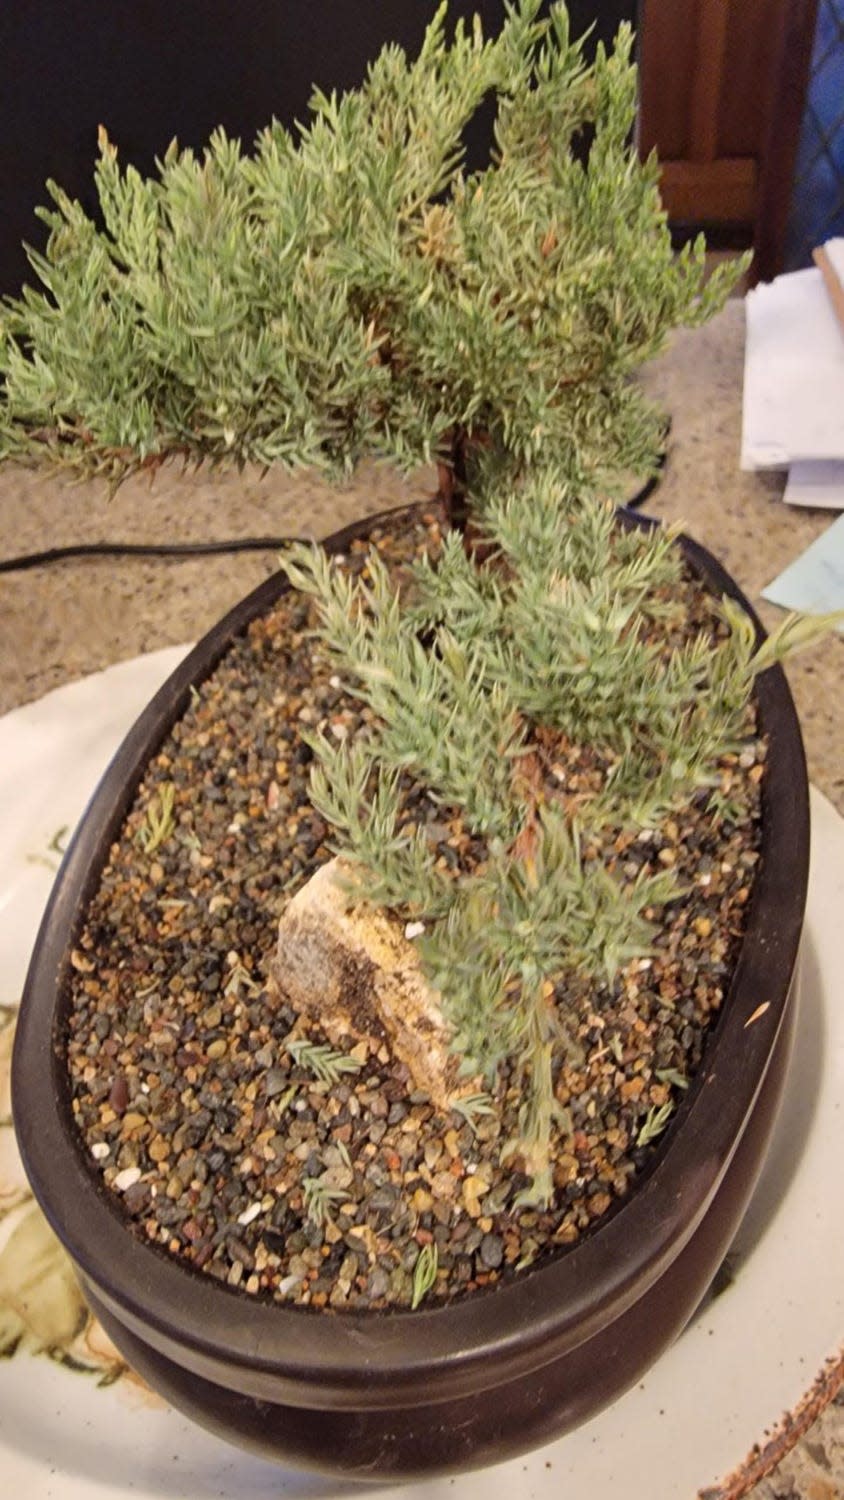 A sale on bonsai plants prompted a surprise gift for a son-in-law experimenting with the art, another way of bringing the green indoors for the winter months.